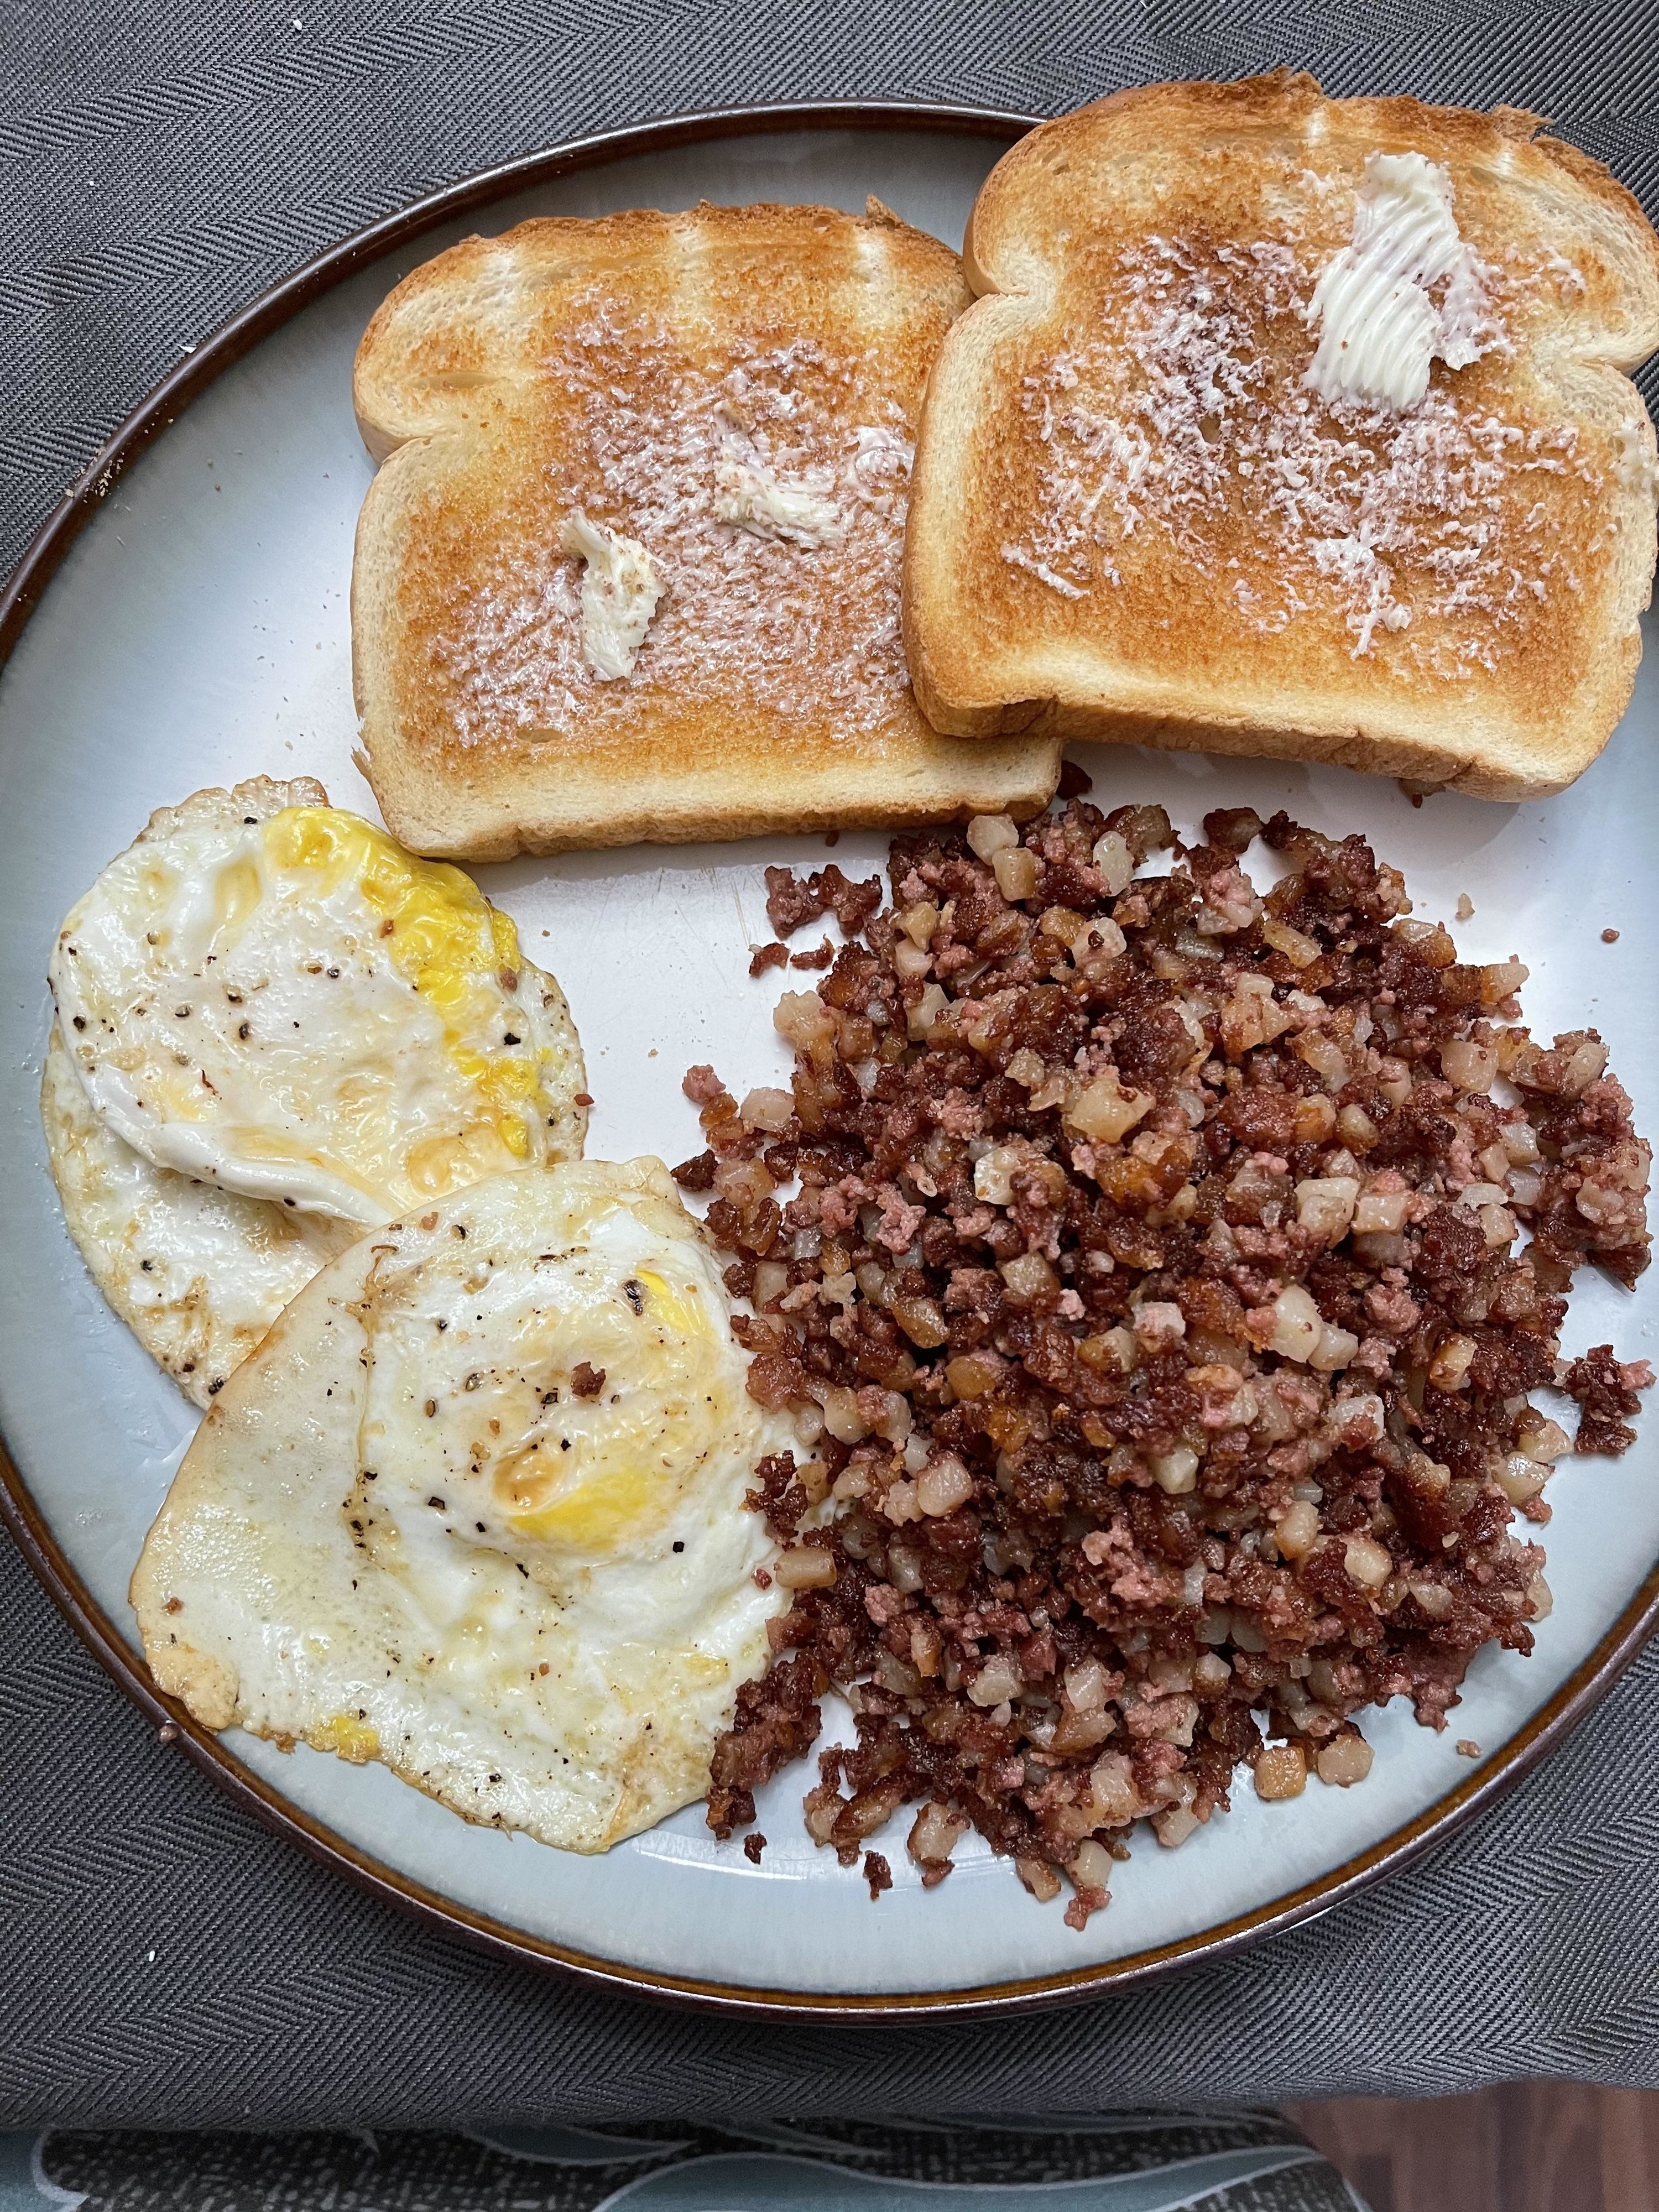 Corned beef hash, fried eggs, and toast